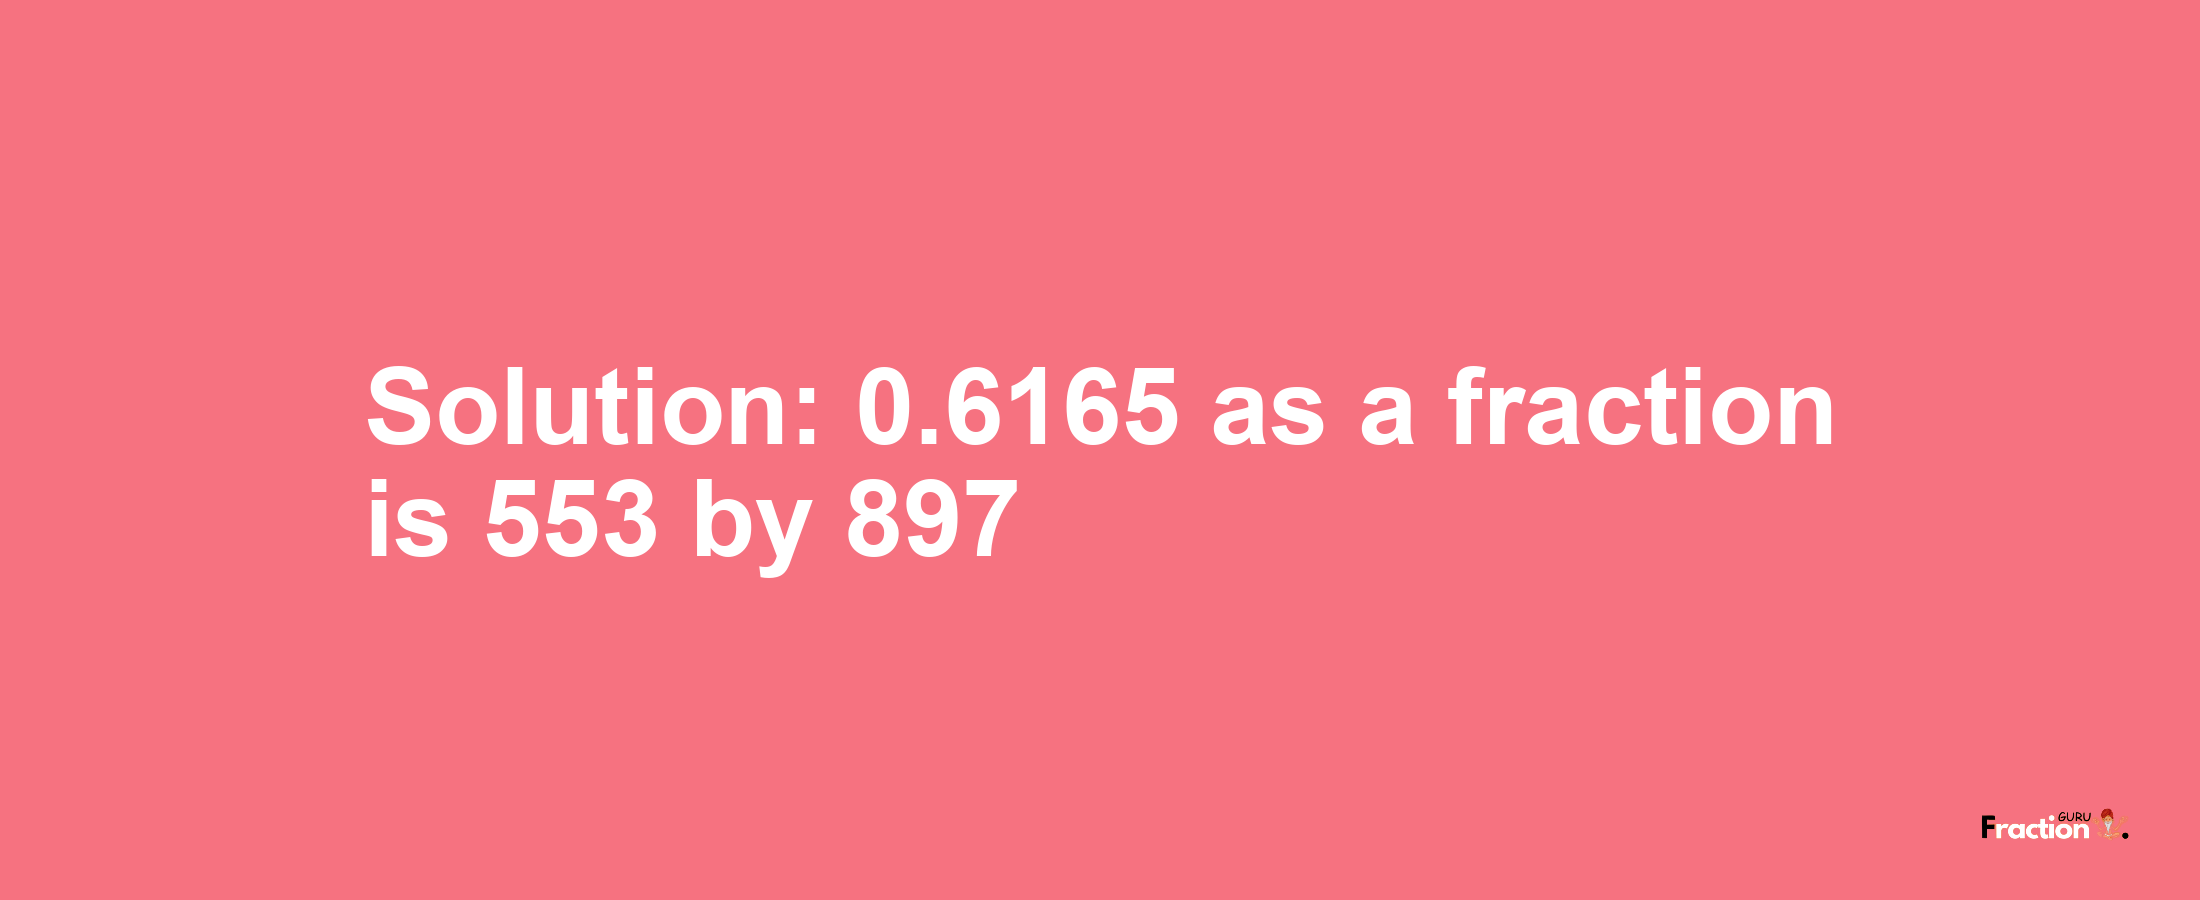 Solution:0.6165 as a fraction is 553/897